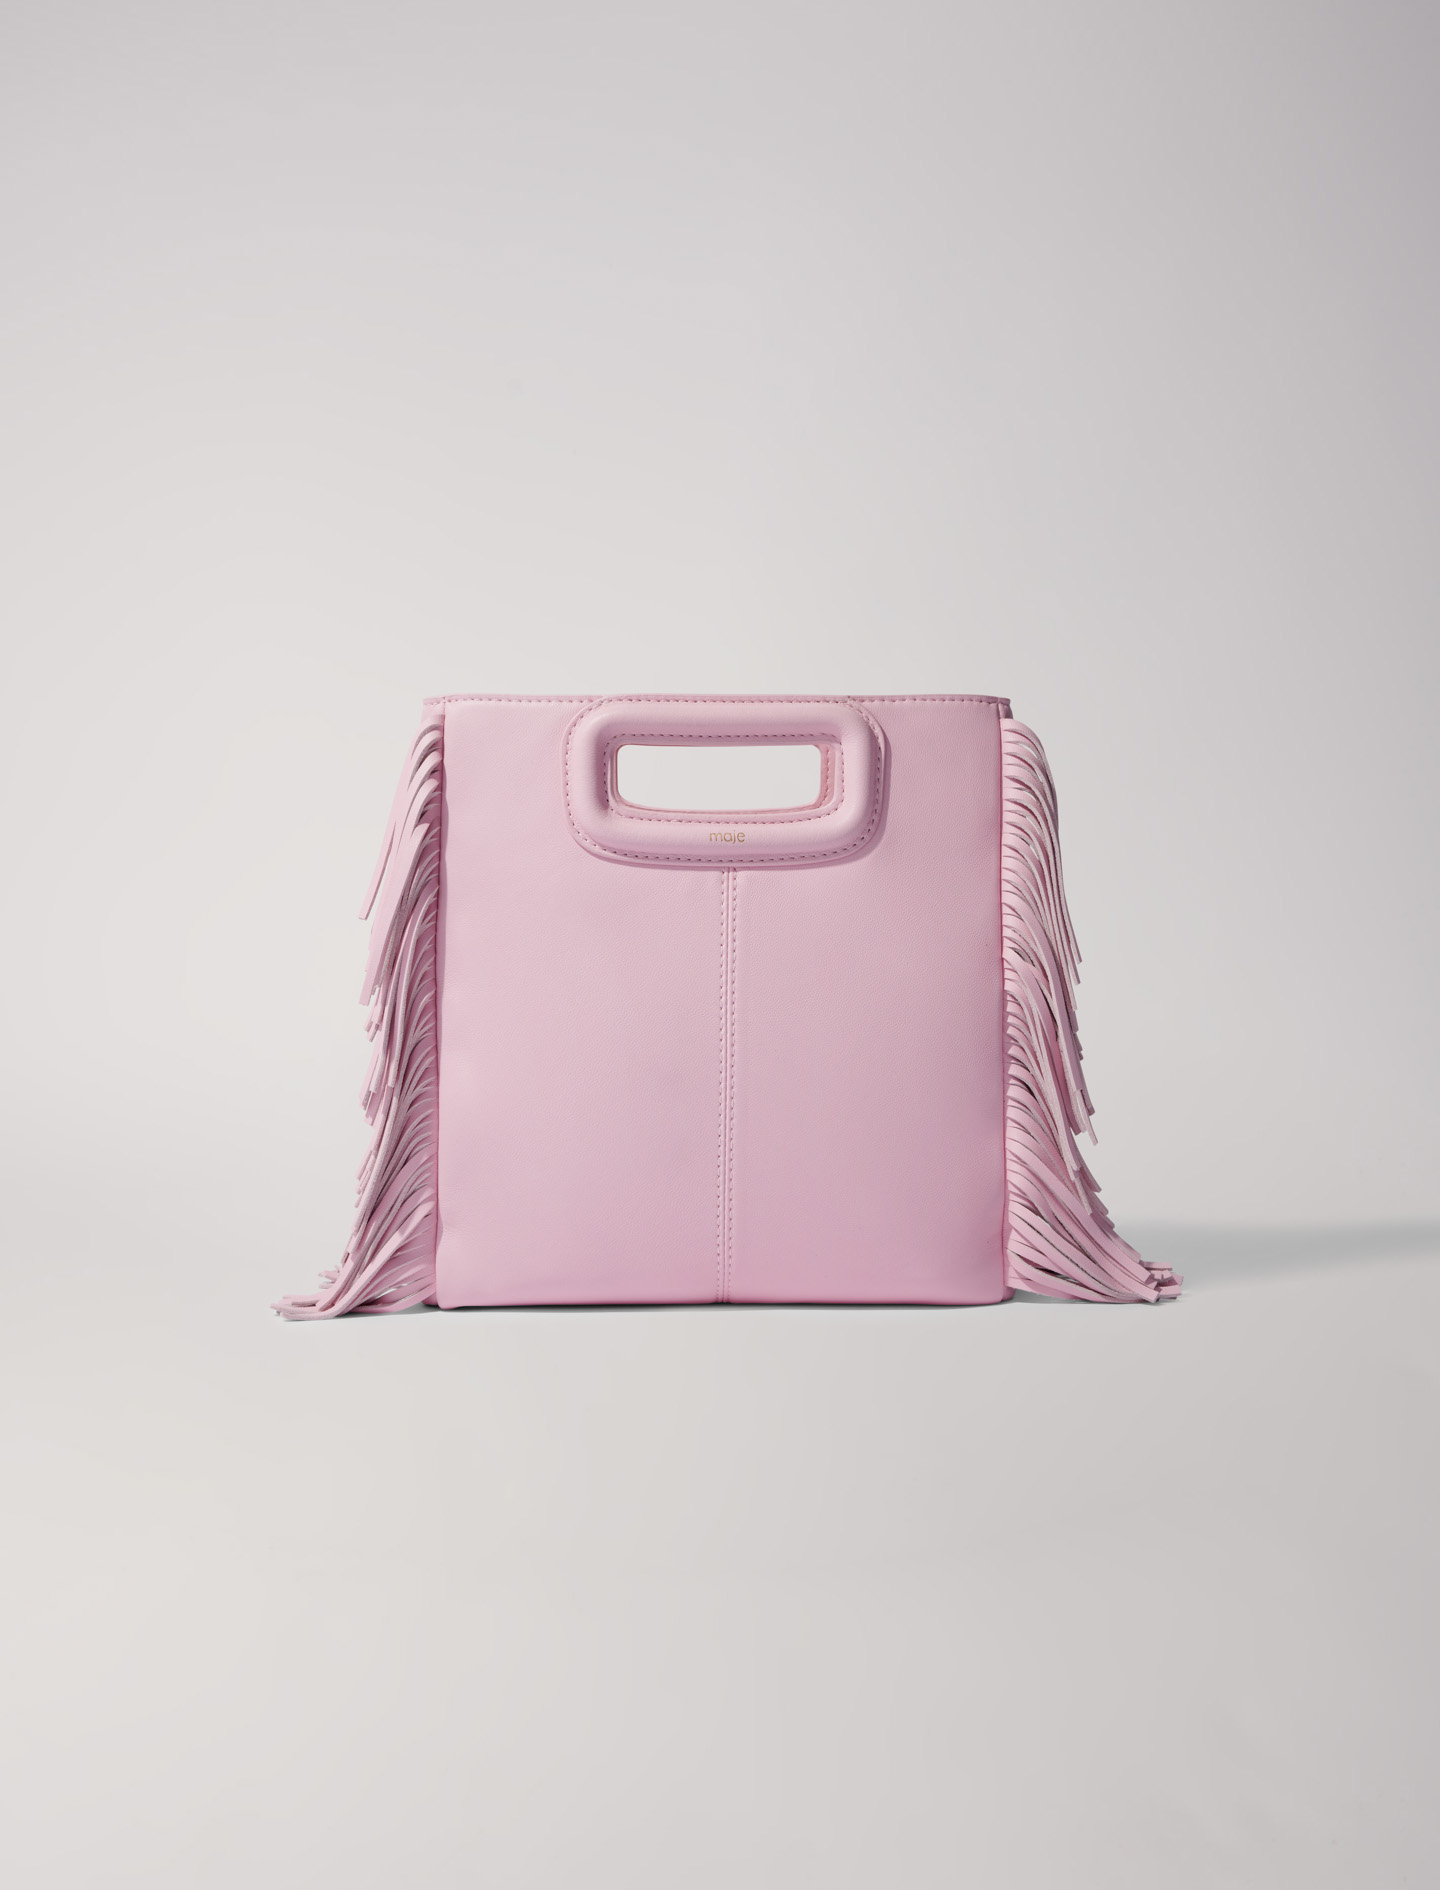 Maje Woman's polyester Leather: Smooth leather M bag with fringing for Spring/Summer, in color Pale Pink / Red